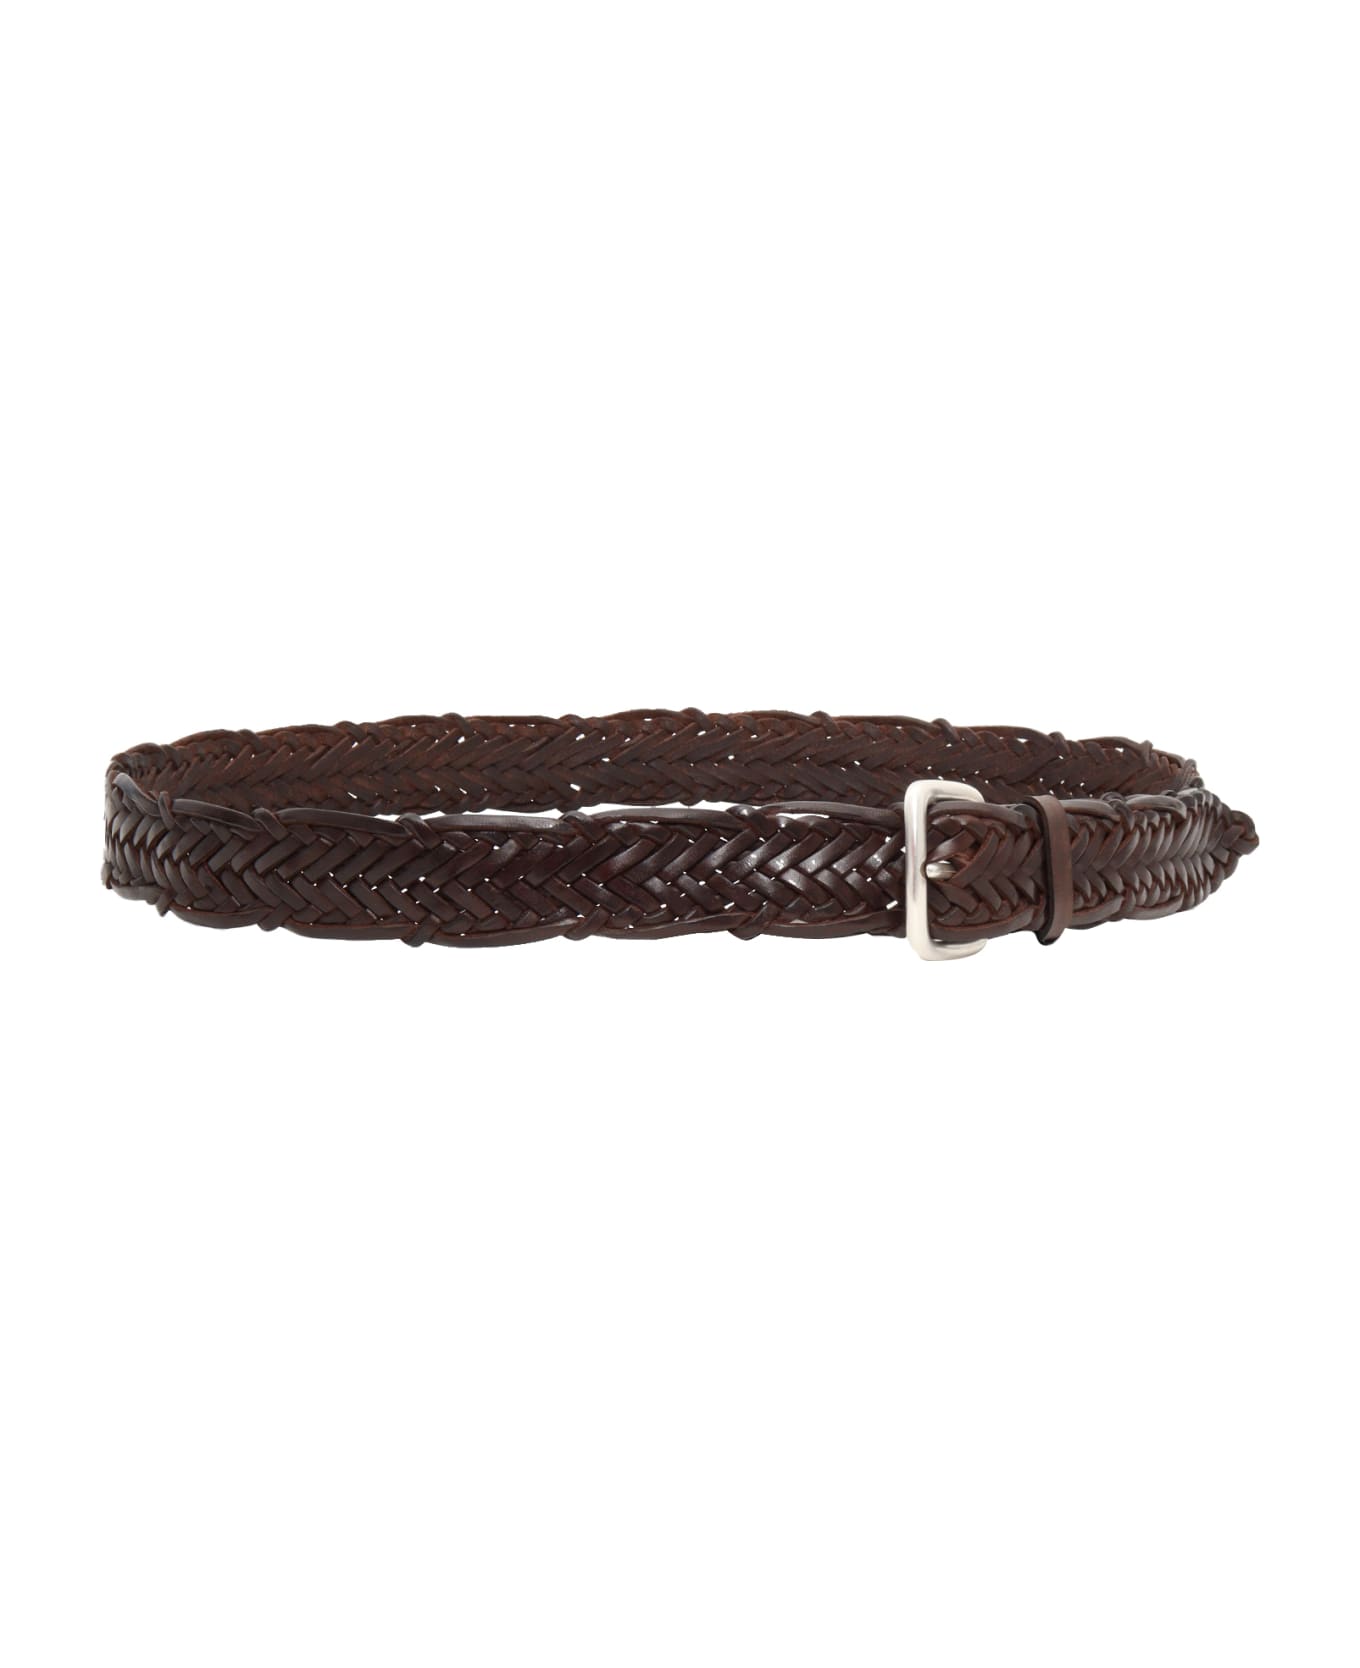 Orciani Brown Braided Belt - BROWN